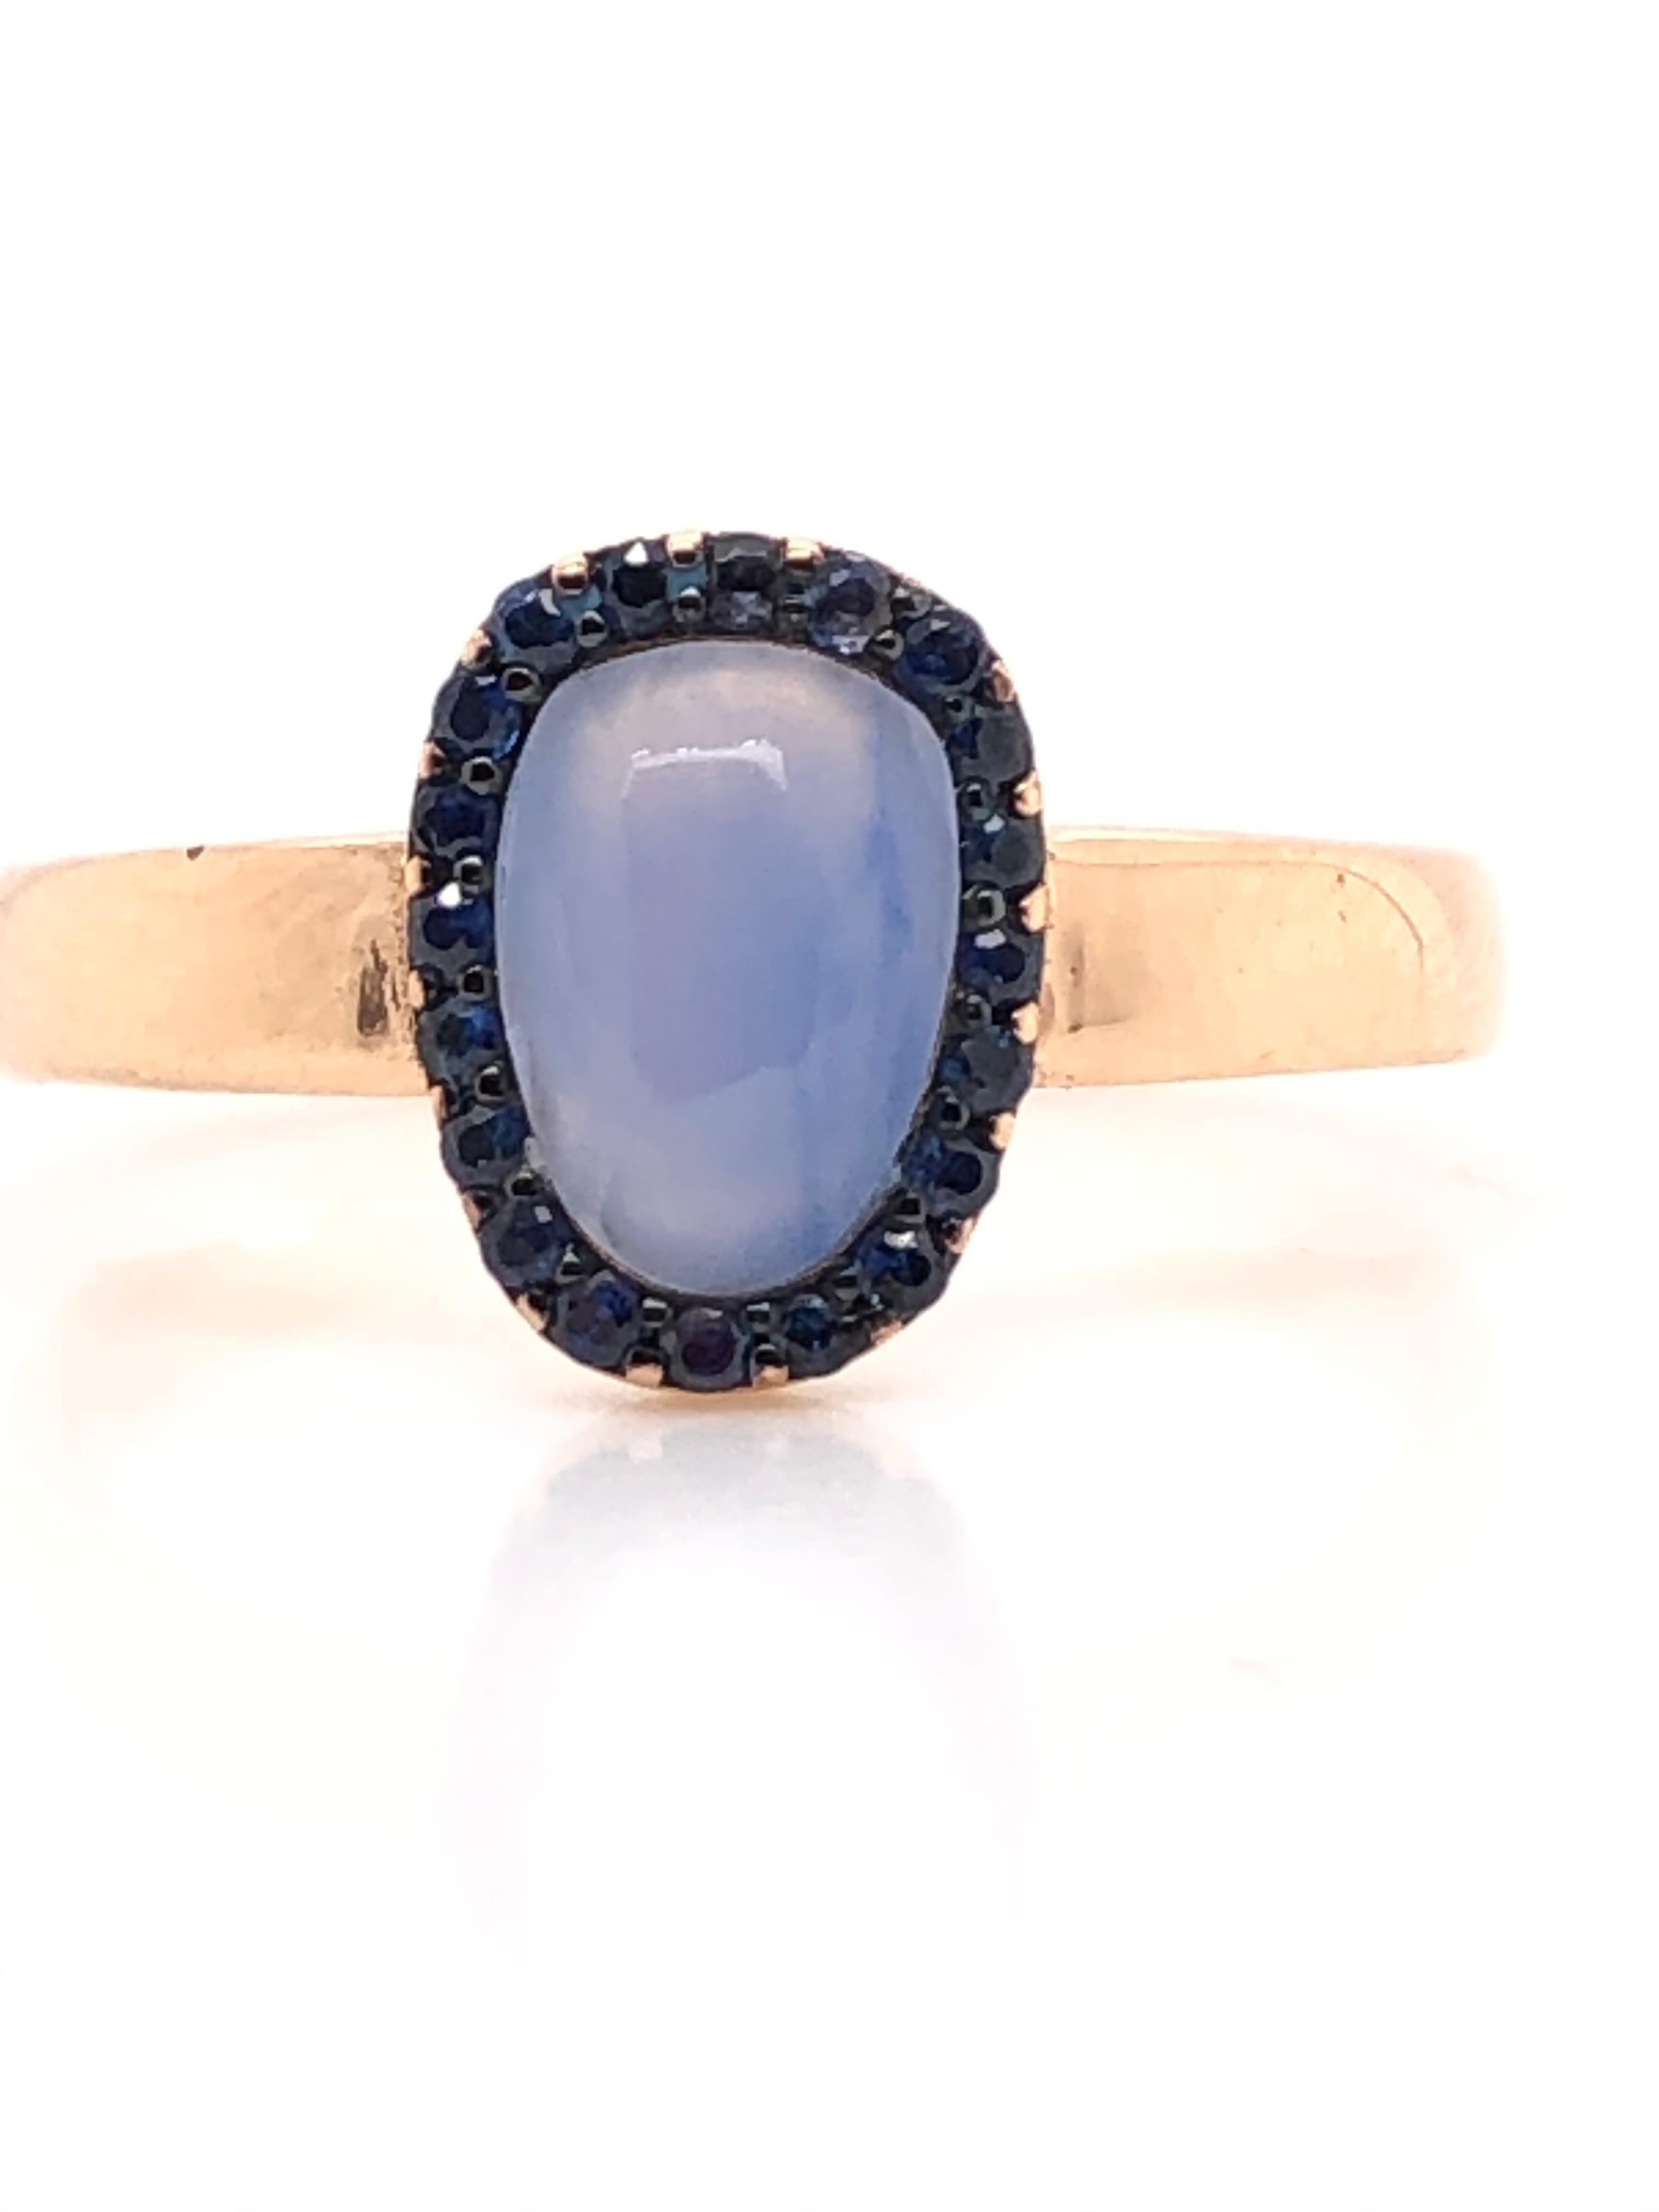 Calcedony and Blue Sapphire on Rose Gold 18 k Ring
Chalcedony Cabochon Shape
Blue Sapphire 0.16 ct
French Size : 53
Us Size : 6 3/4
British Size :  M
Weight Of Gold : 3.05 Grams

